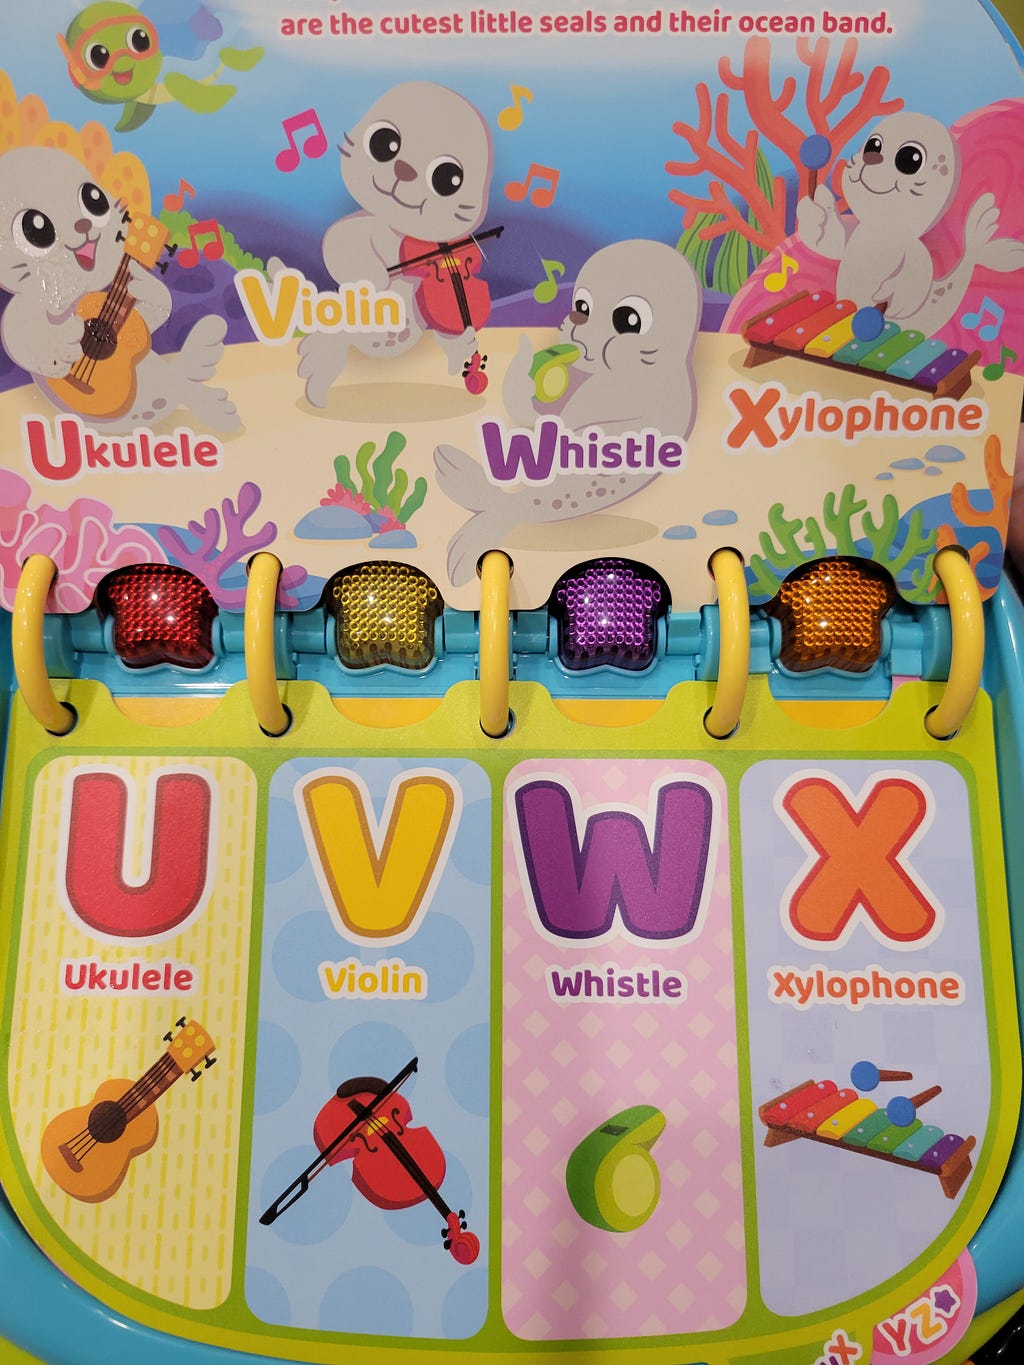 A picture of a children’s alphabet book with U for ukelele, V for violin, W for whistle, and X for xylophone and pictures of the respective objects.